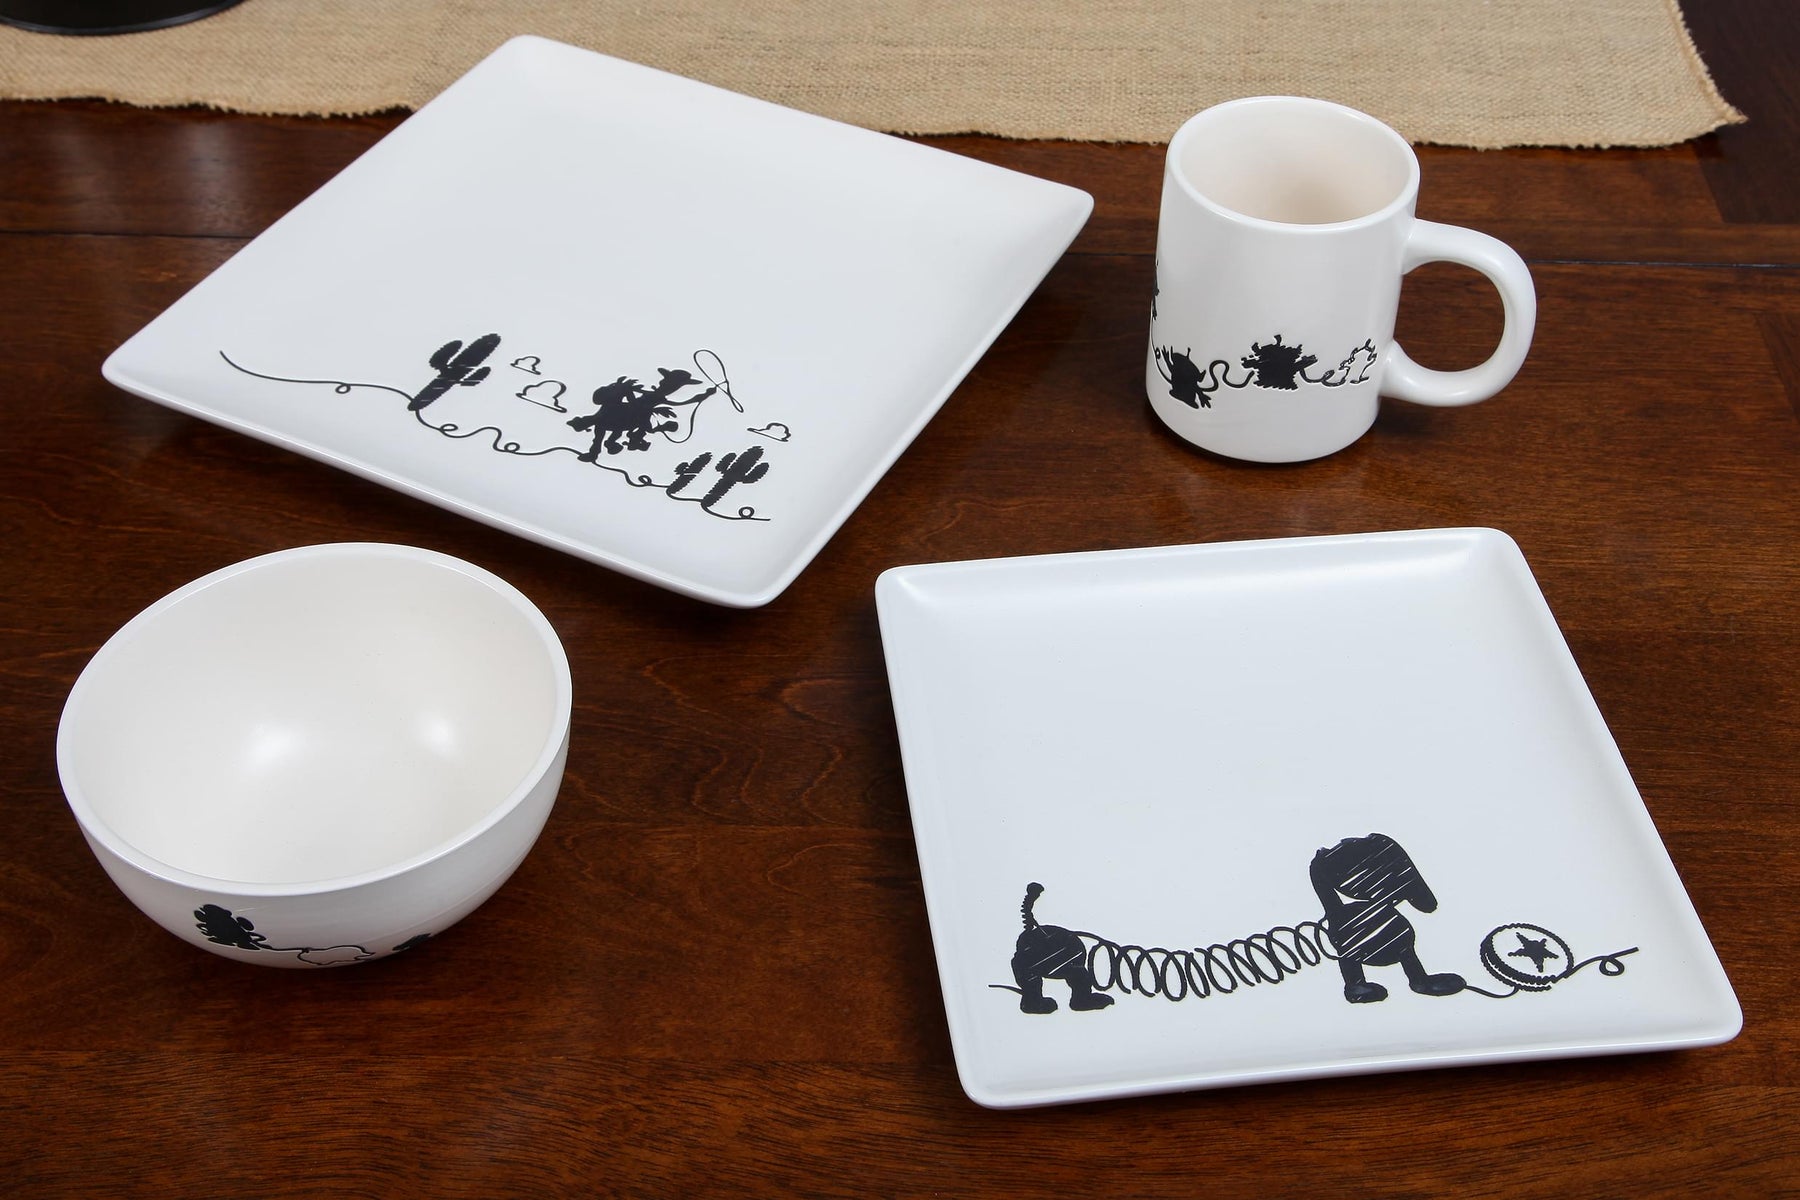 Toy Story 4-Piece Ceramic Dinnerware Set With Scribble Characters